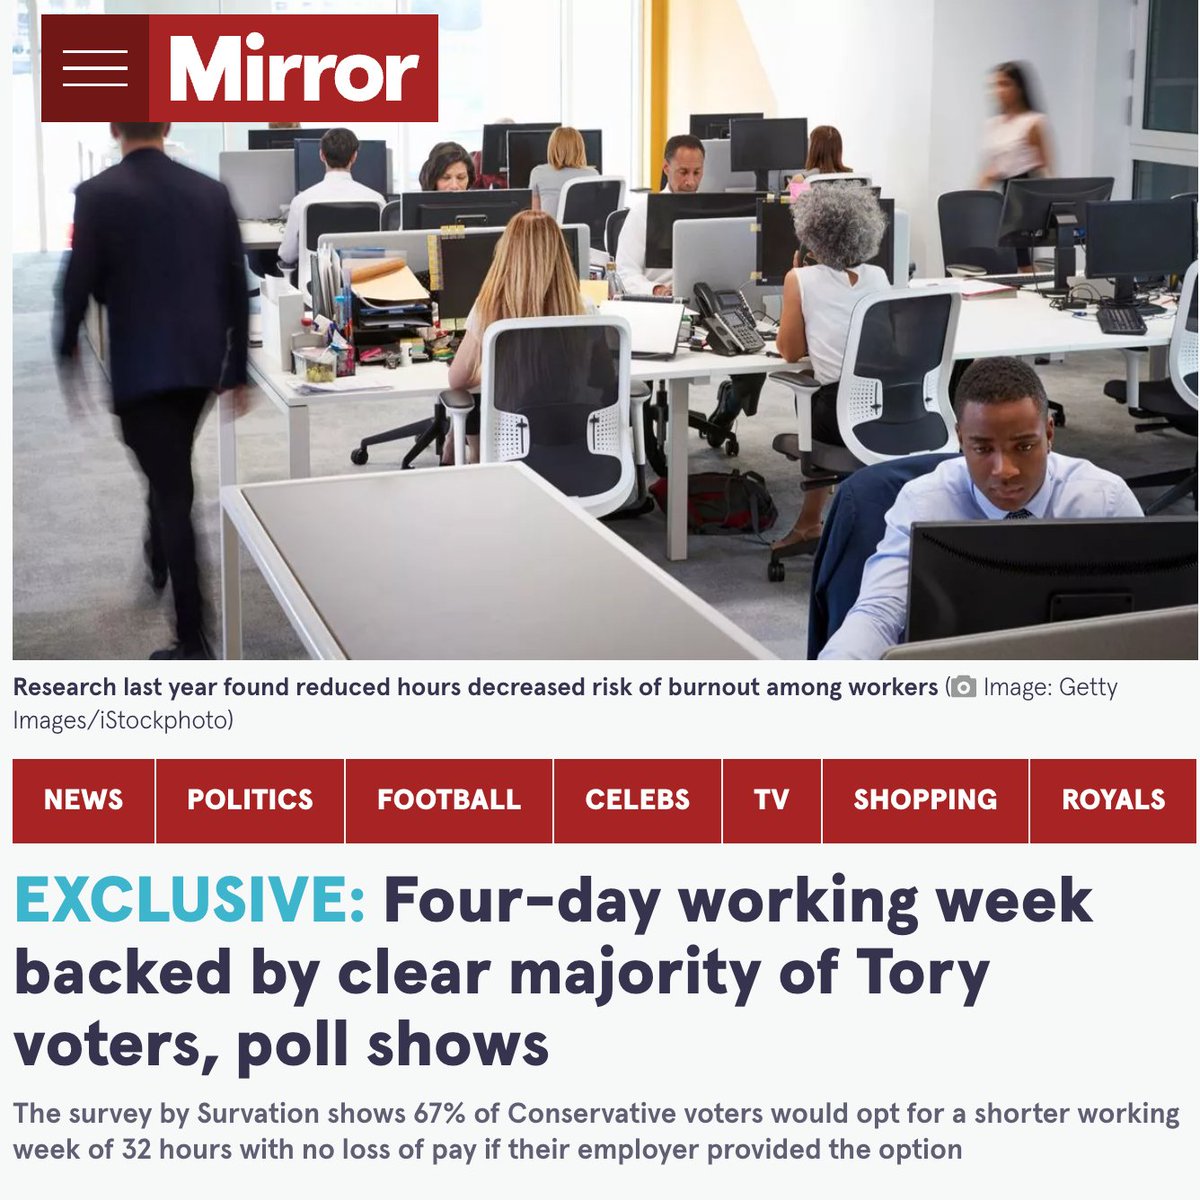 The country is crying out for real progressive change. 67% of Conservative voters want a four-day work week. That's because it improves mental health, supports the economy, and helps tackle the climate crisis. A no-brainer of a policy.